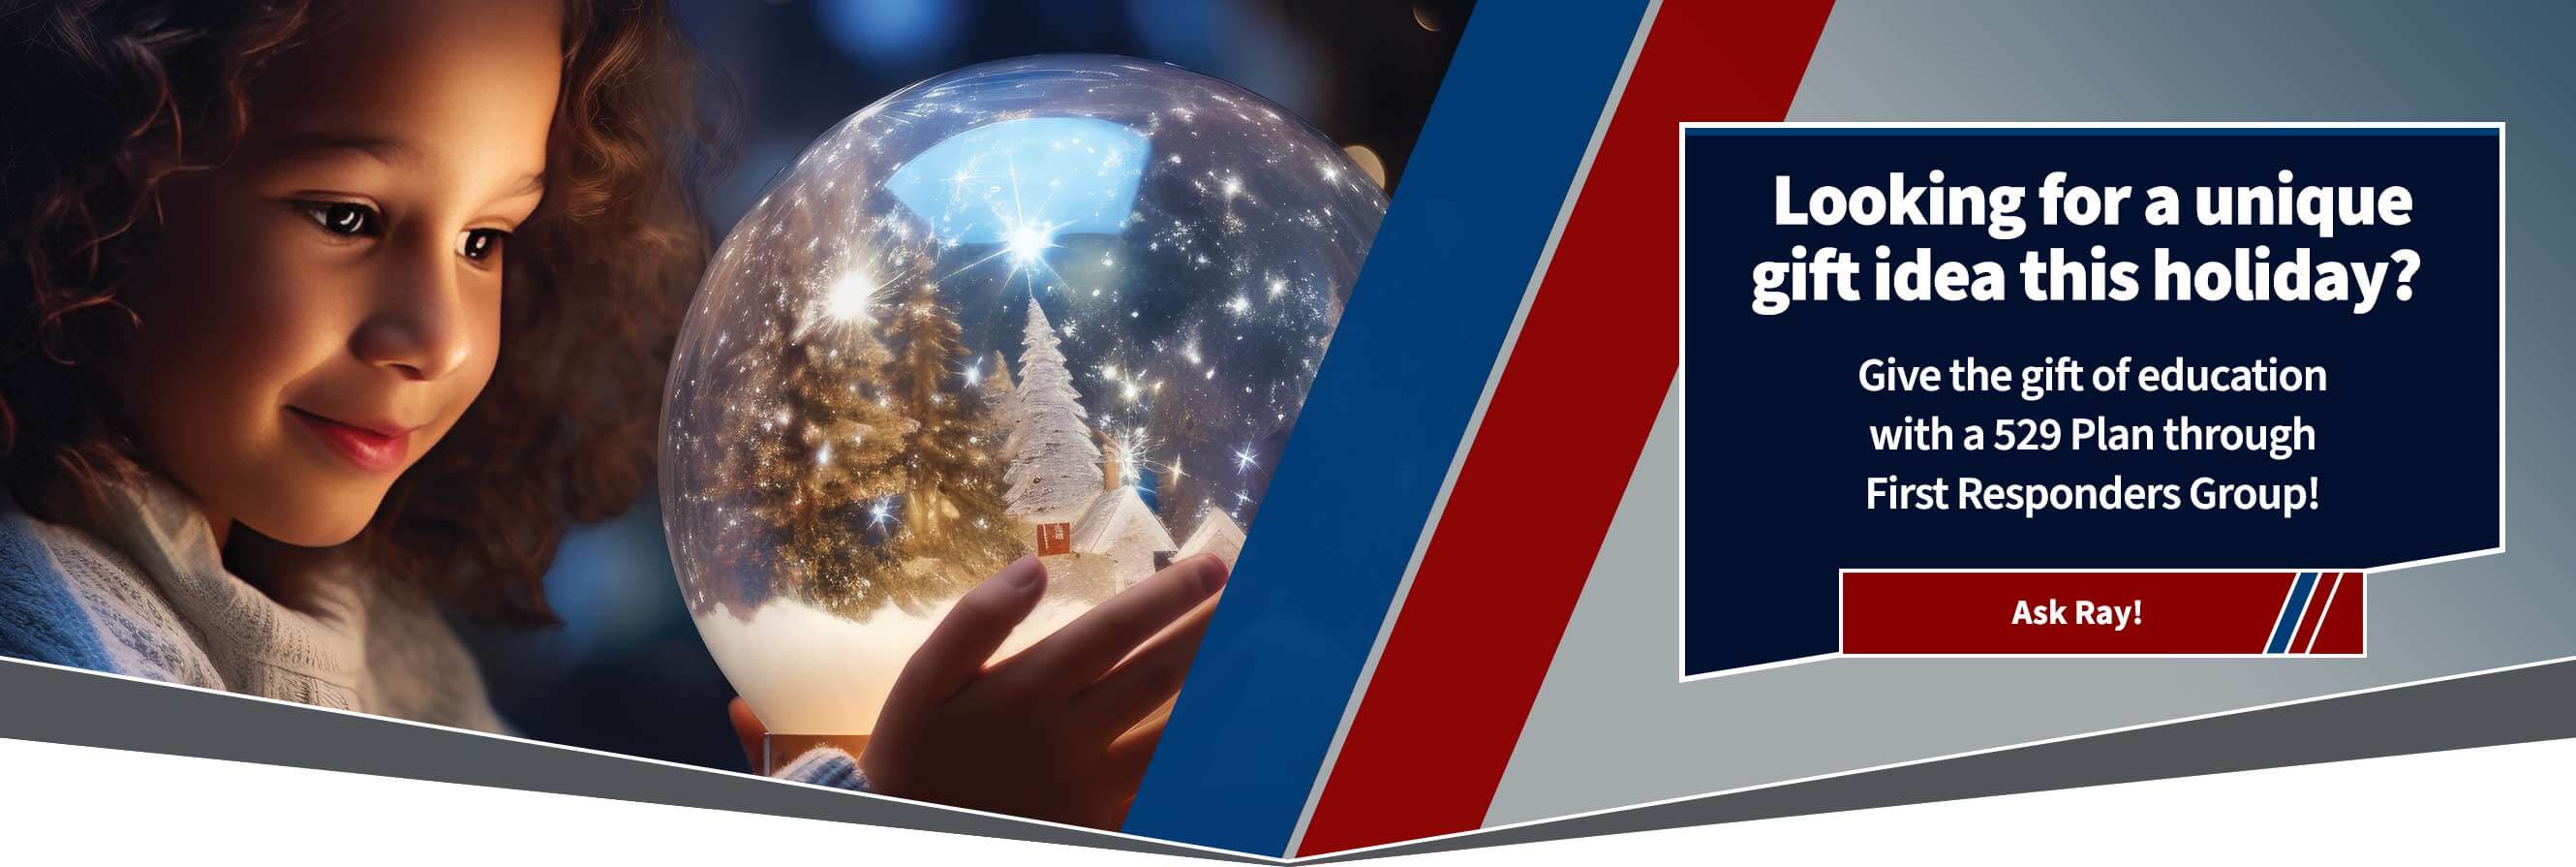 Looking for a unique gift idea this holiday? Give the gift of education with a 529 Plan through First Responders Group! Ask Ray!